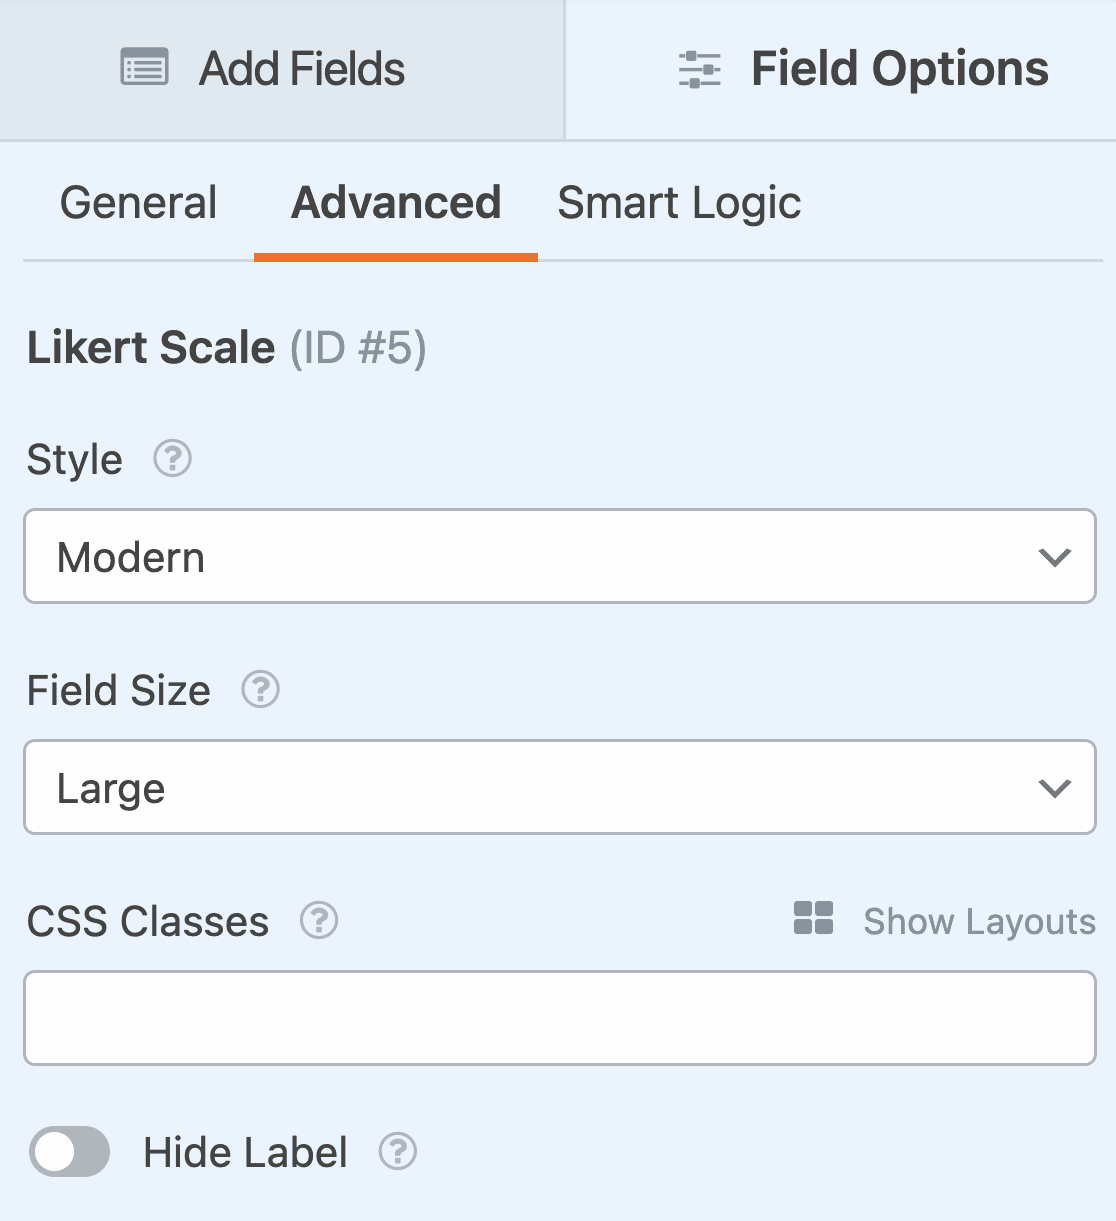 The advanced field options for the Likert Scale